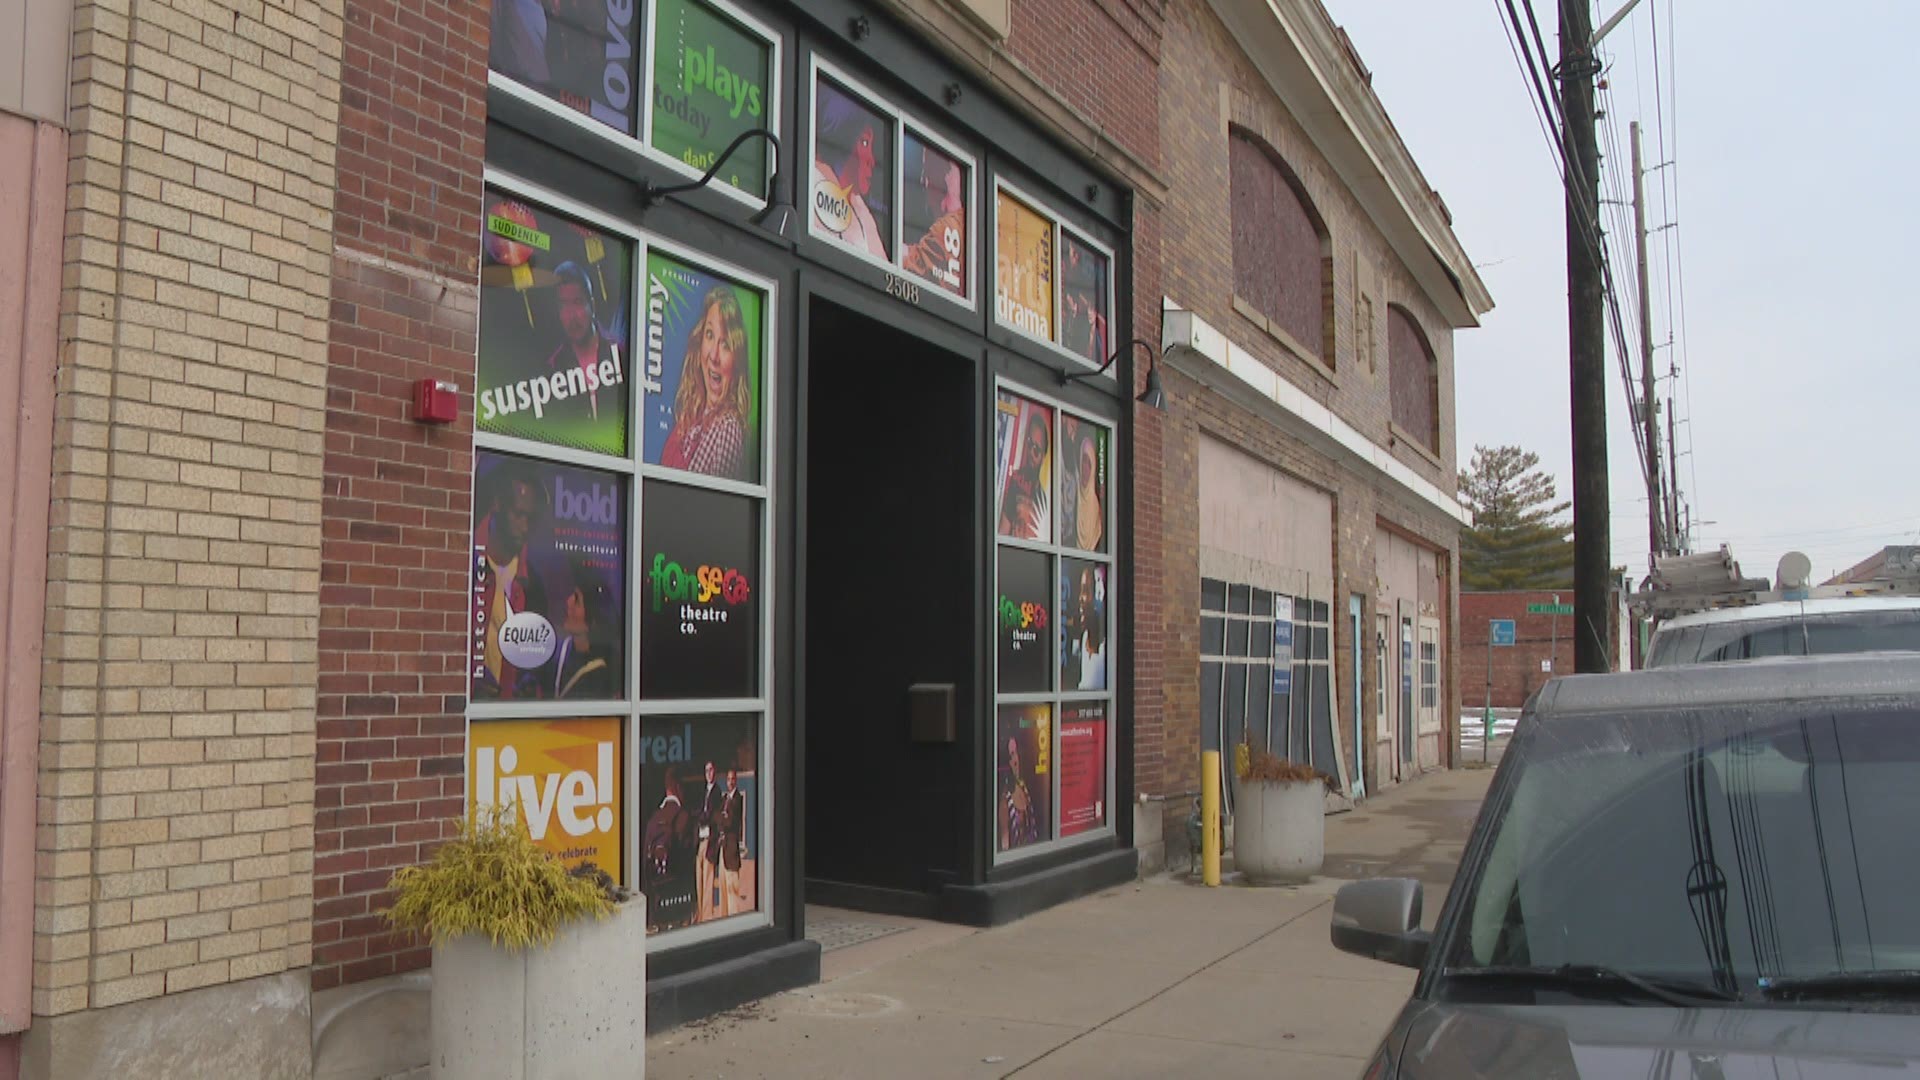 The near-west side theater is taking steps to resume performances.